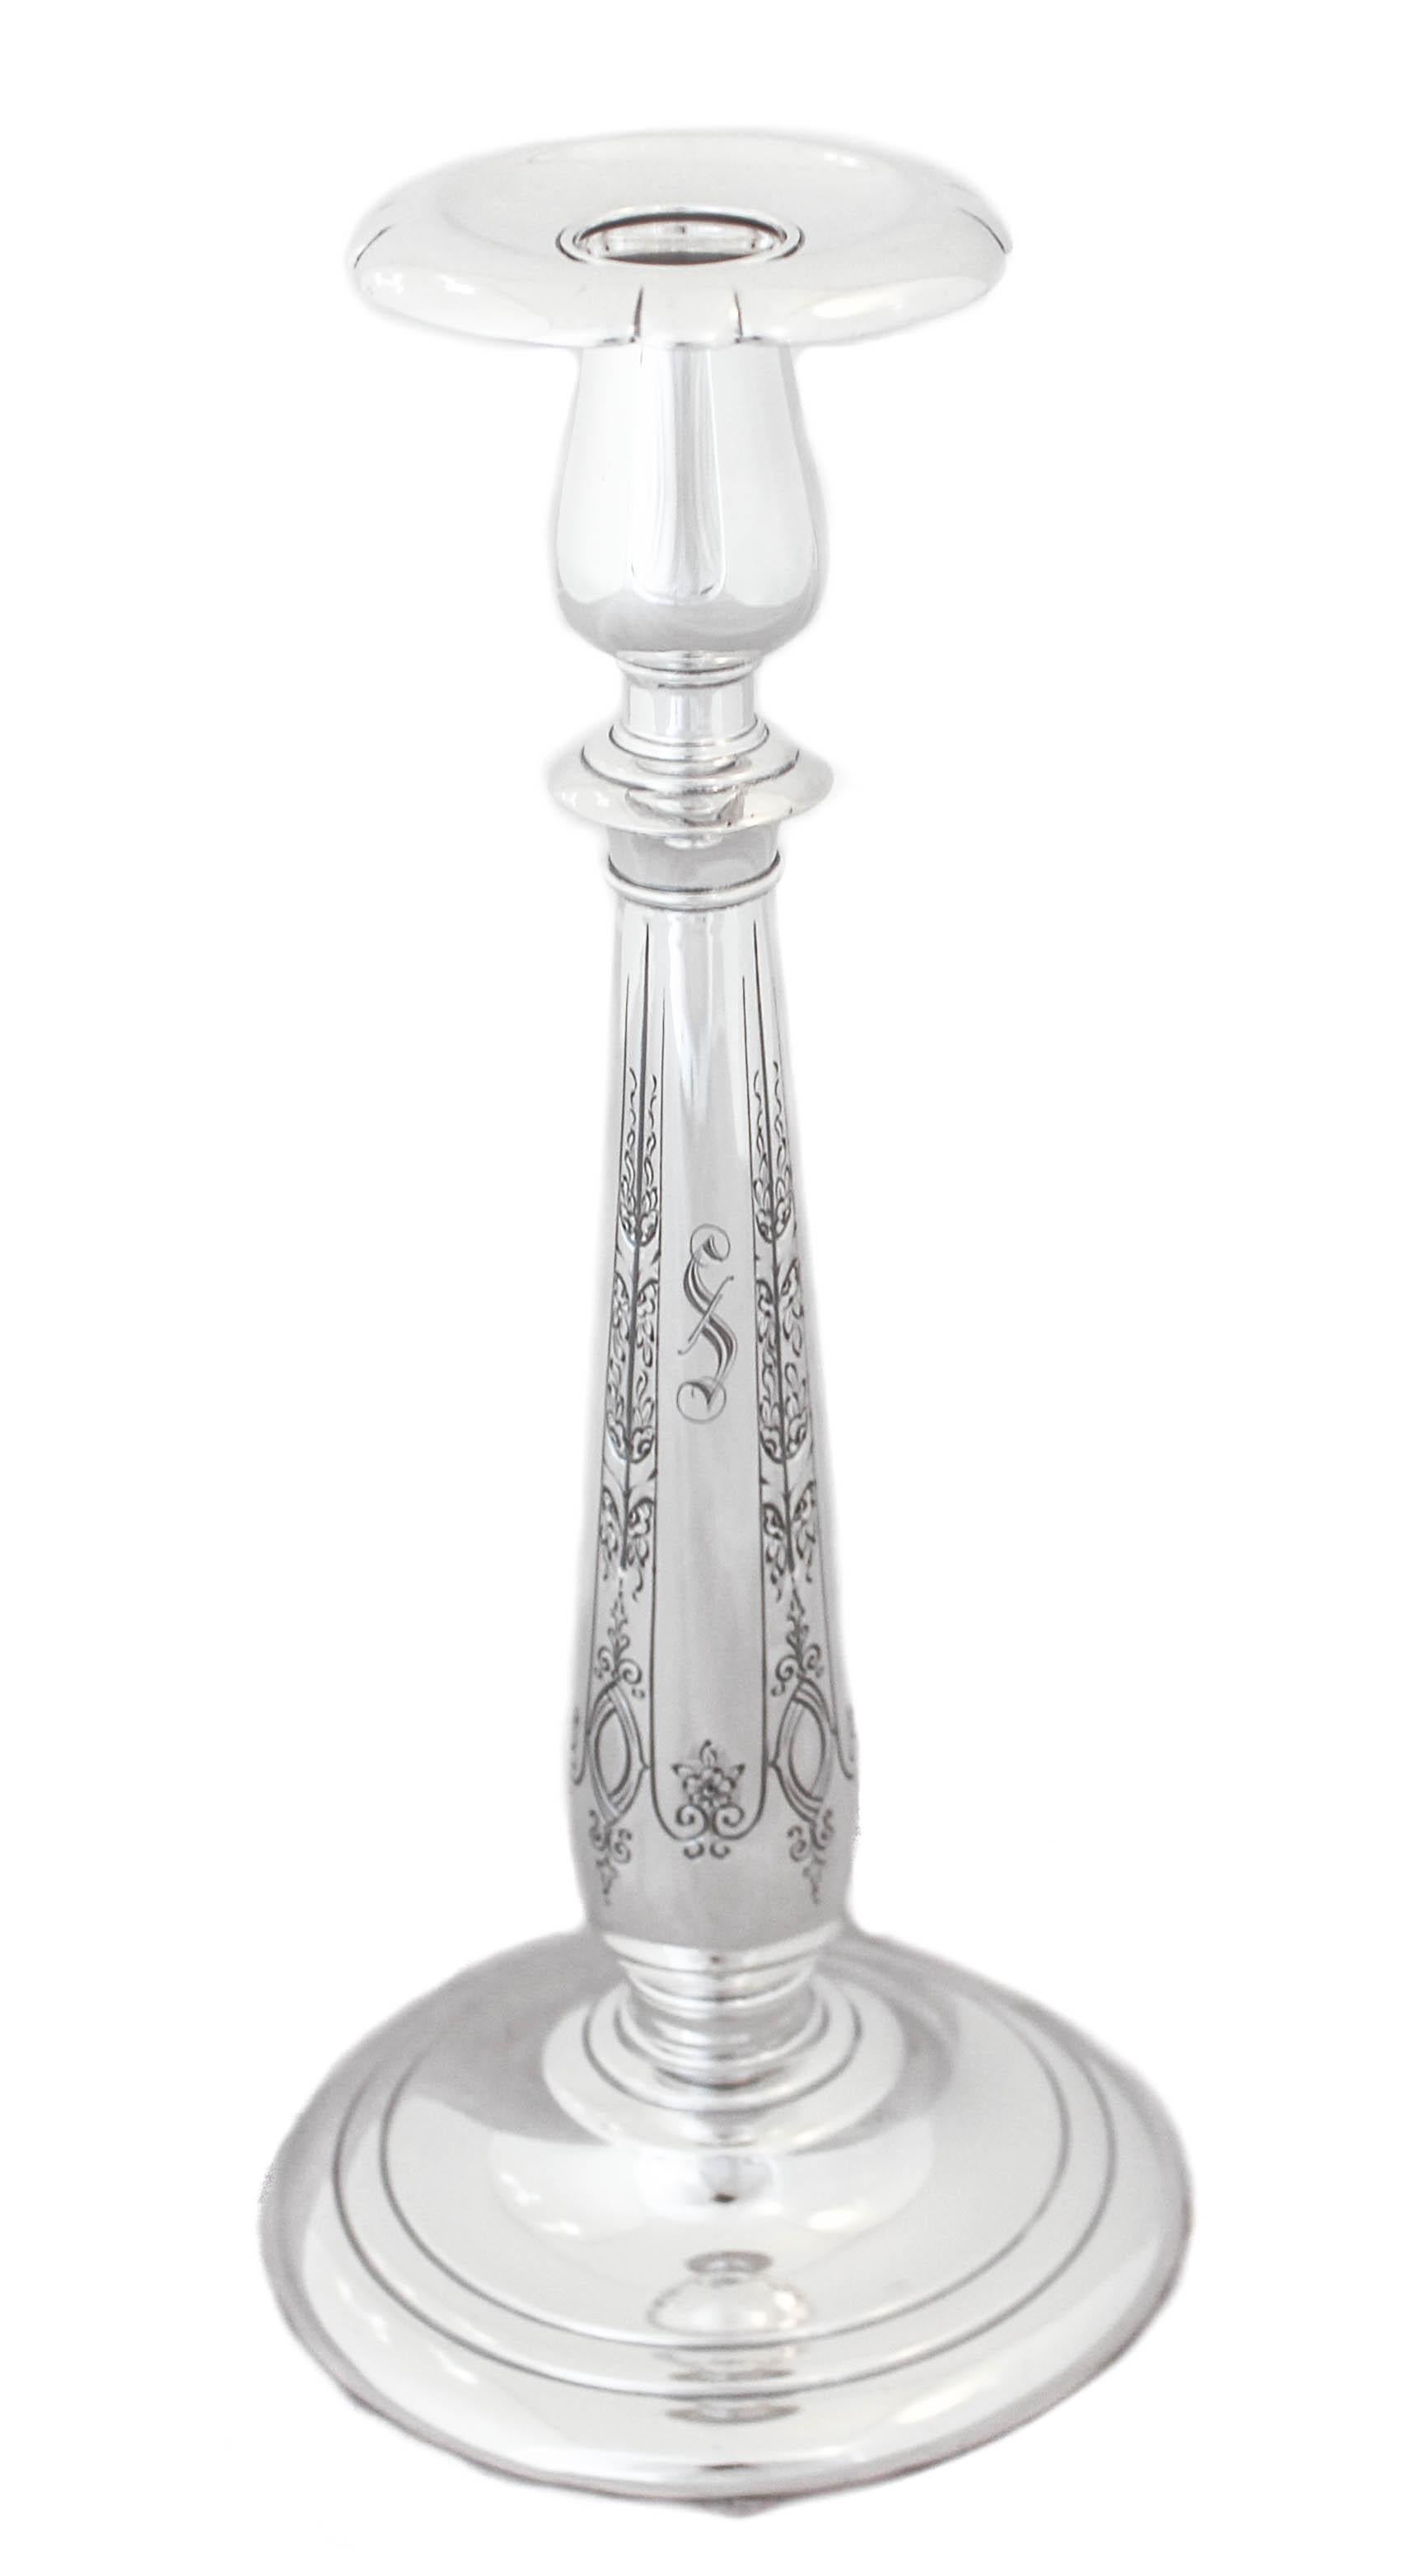 We are happy to offer you this pair of sterling silver candlesticks by Towle Silversmiths in the “Lady Diana” pattern, circa 1928. The have an Art Deco feel to them with the scalloped bobeche and shape. Very graceful and feminine they have an etched